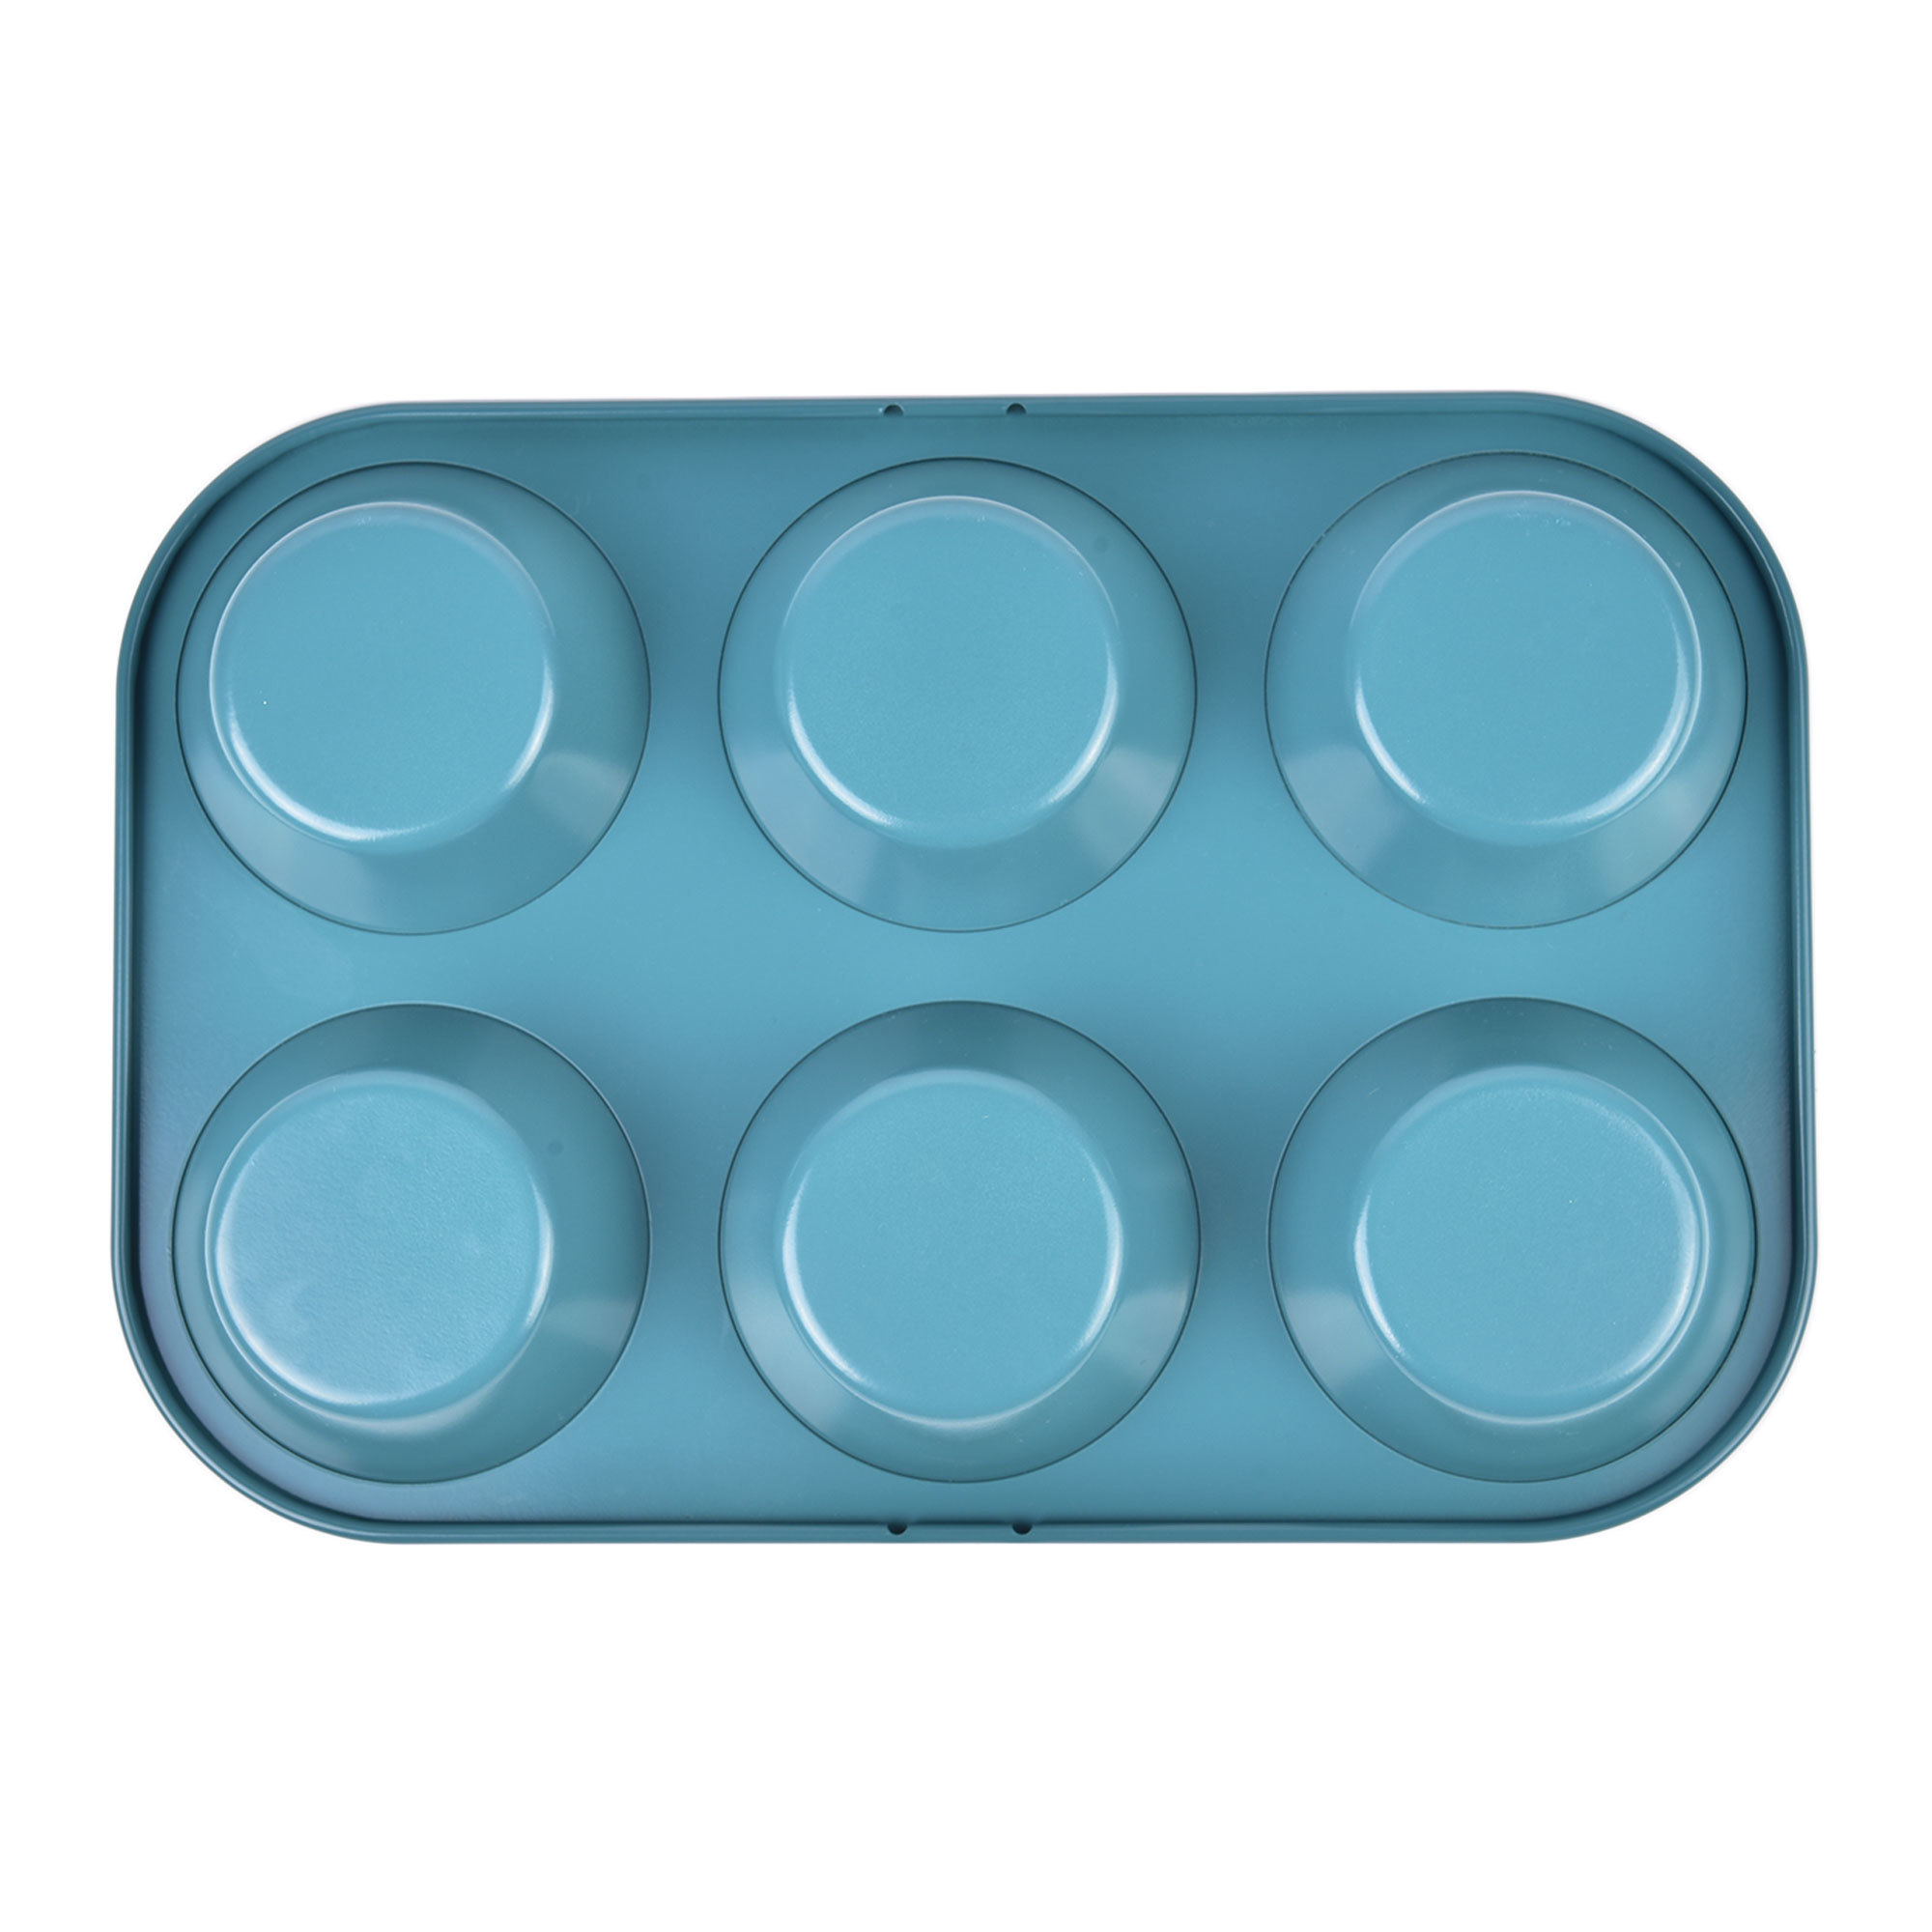 6Cup Muffin Pan 3238-10